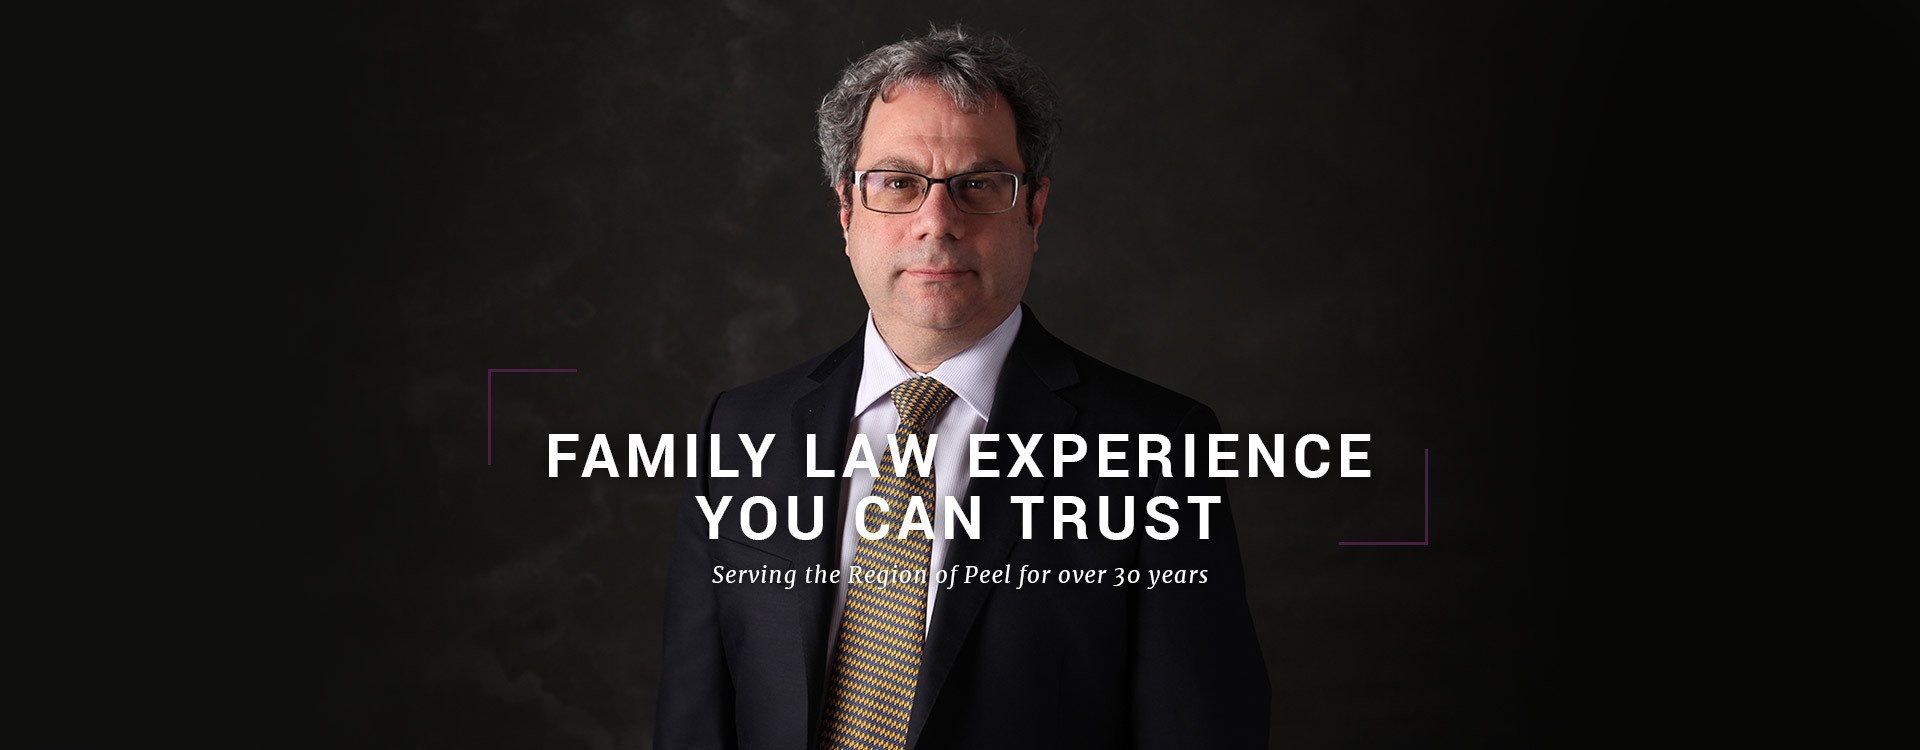 Family Lawyer Stephen I. Beck, serving Peel Region for Over 30 years